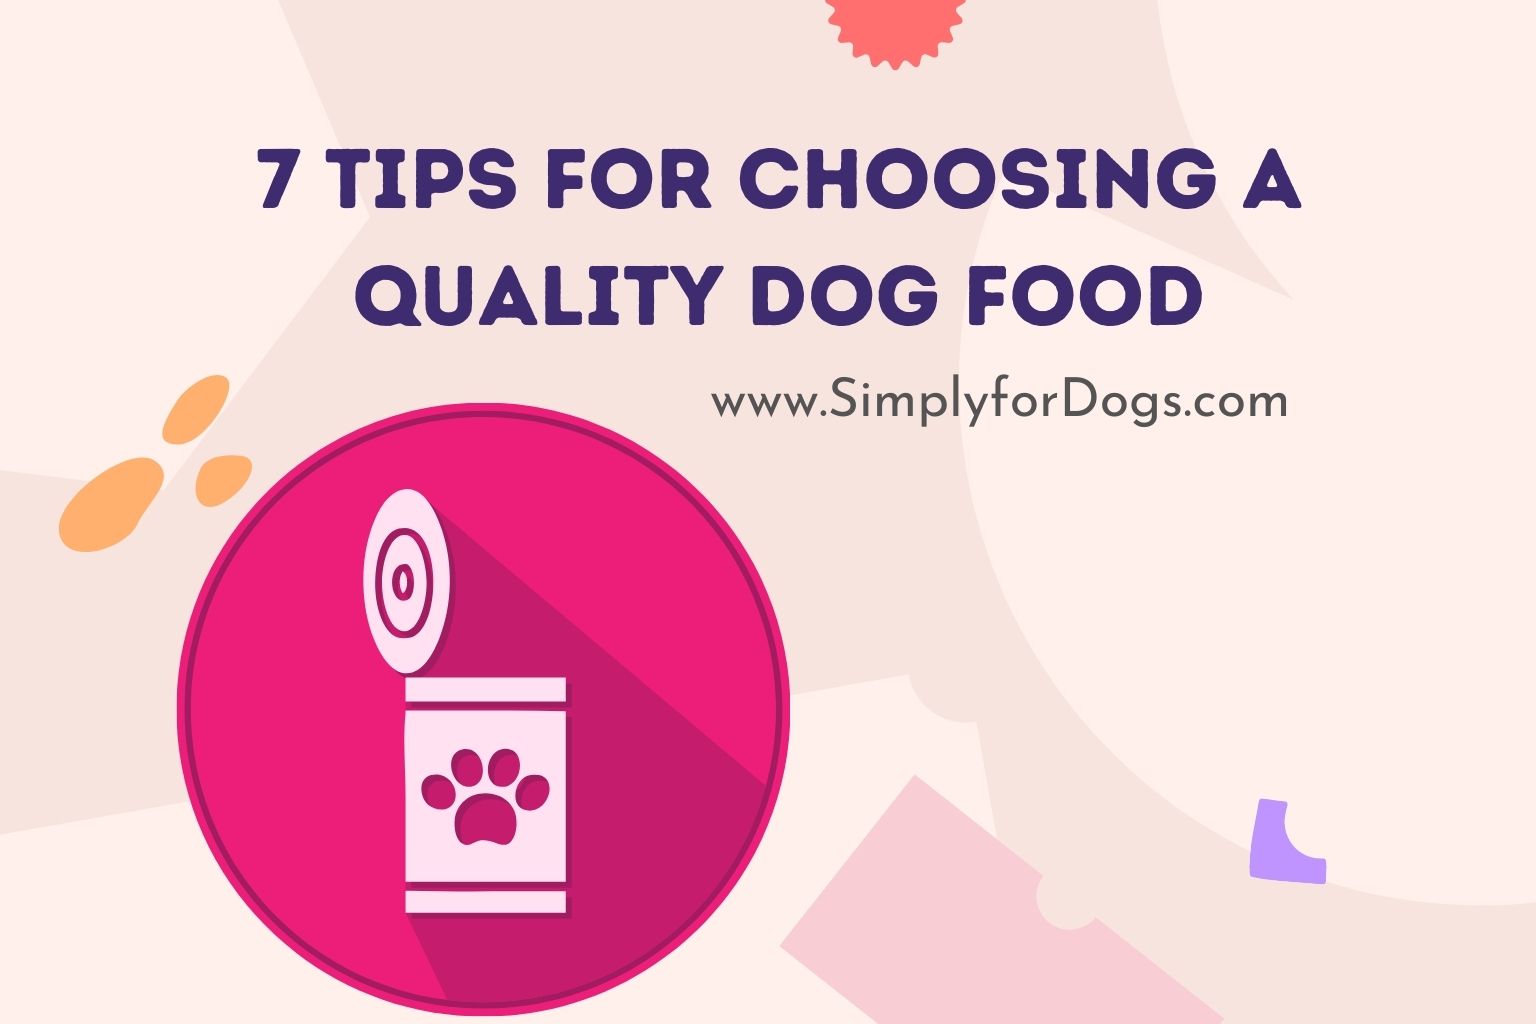 7 Tips for Choosing a Quality Dog Food